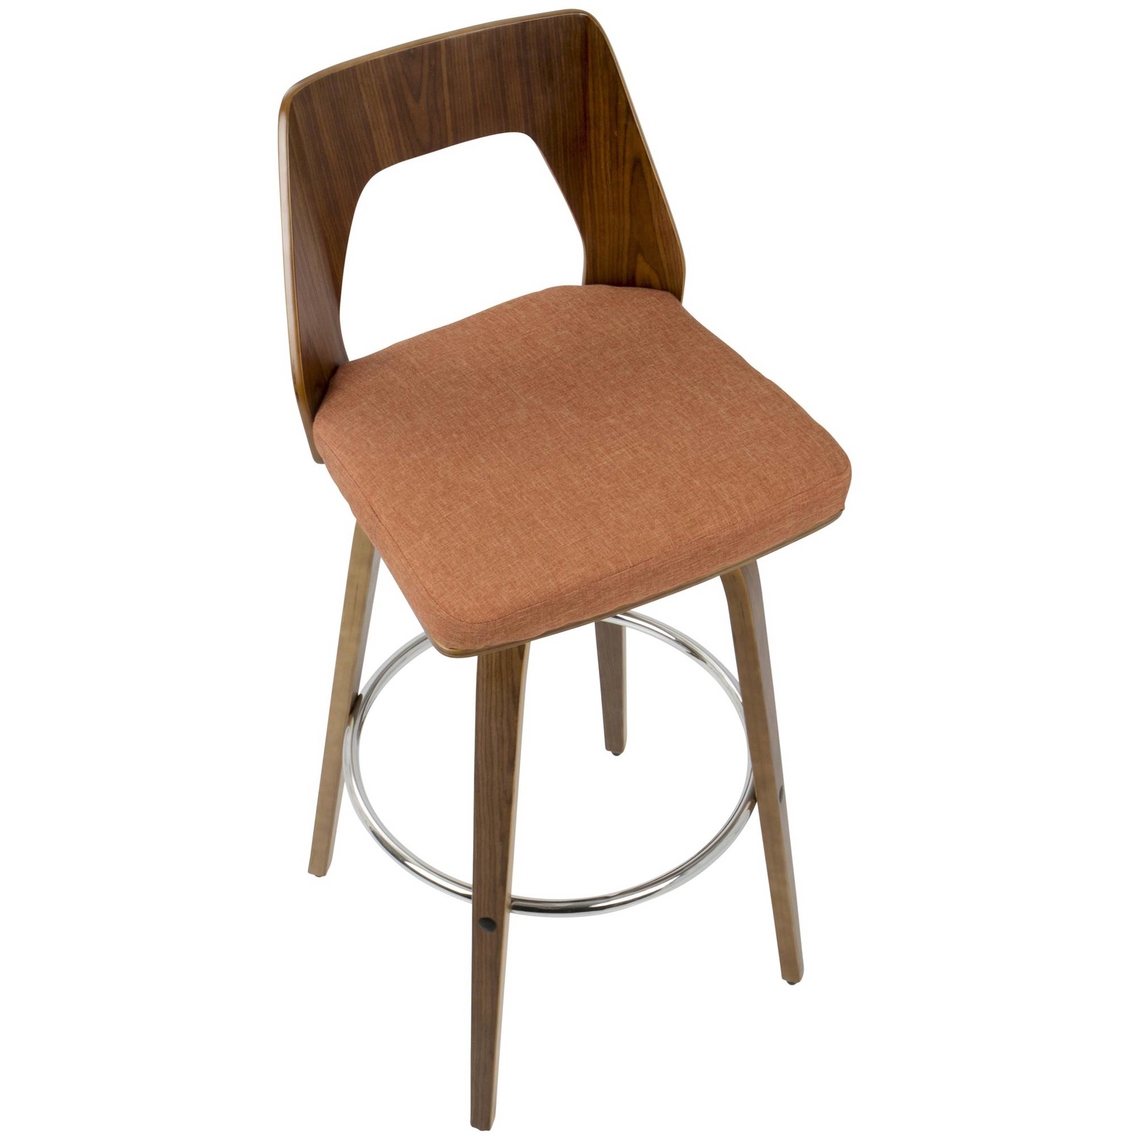 LumiSource Trilogy 30 in. Barstool 2 pk. - Image 5 of 5